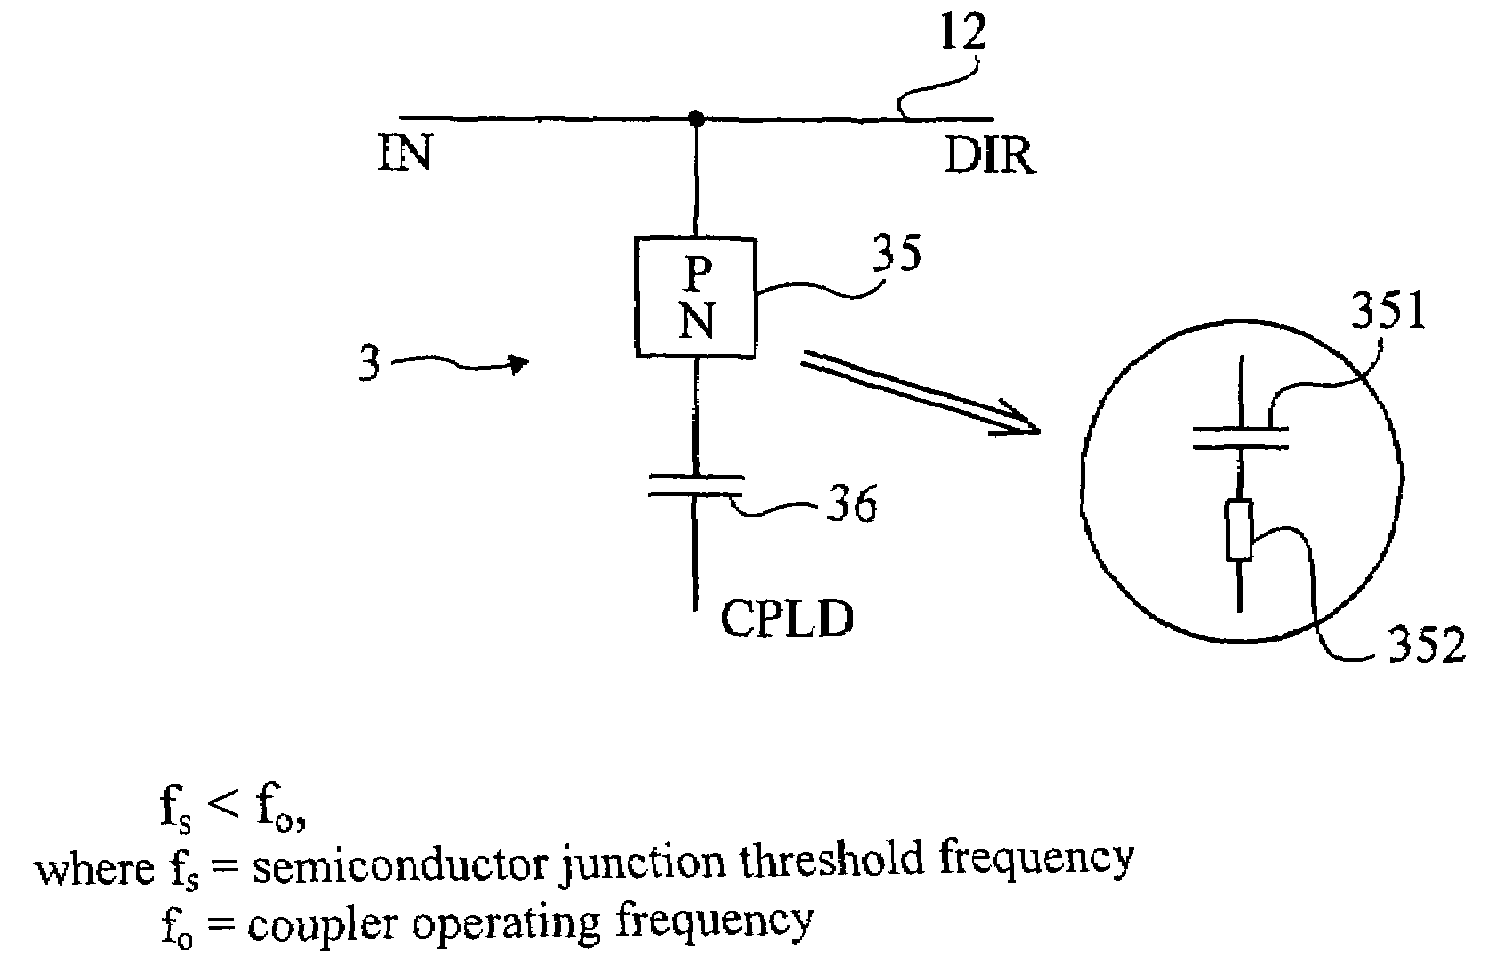 Integrated coupler